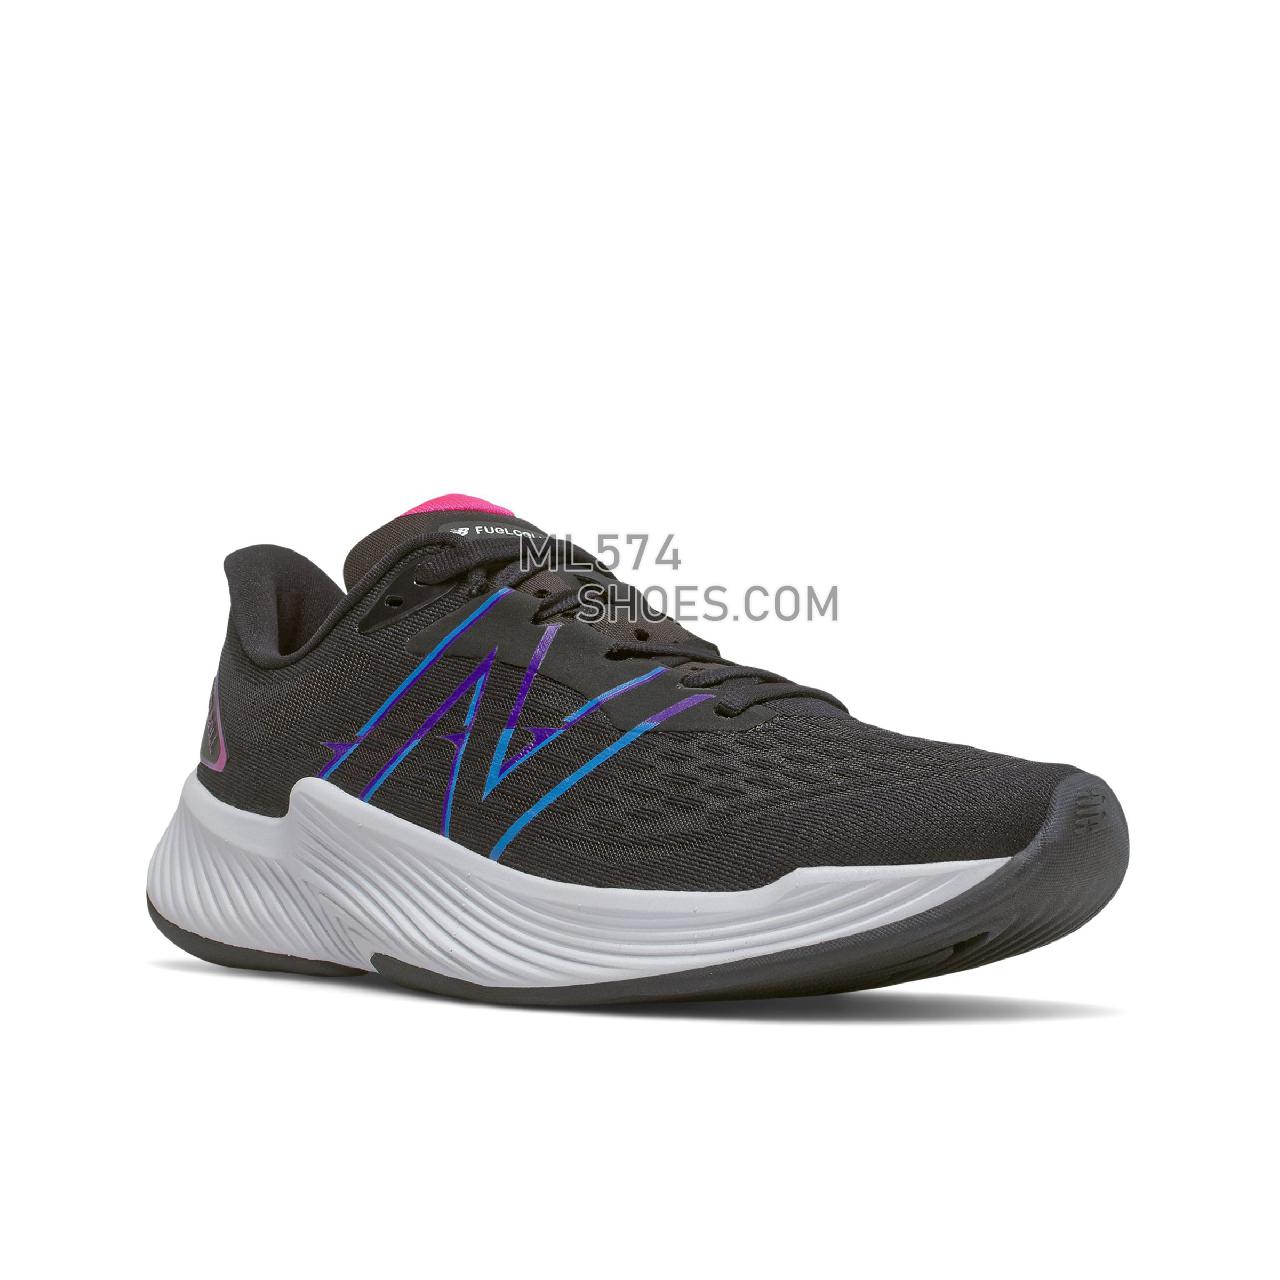 New Balance FuelCell Prism v2 - Women's Stability Running - Black with Deep Violet - WFCPZLB2